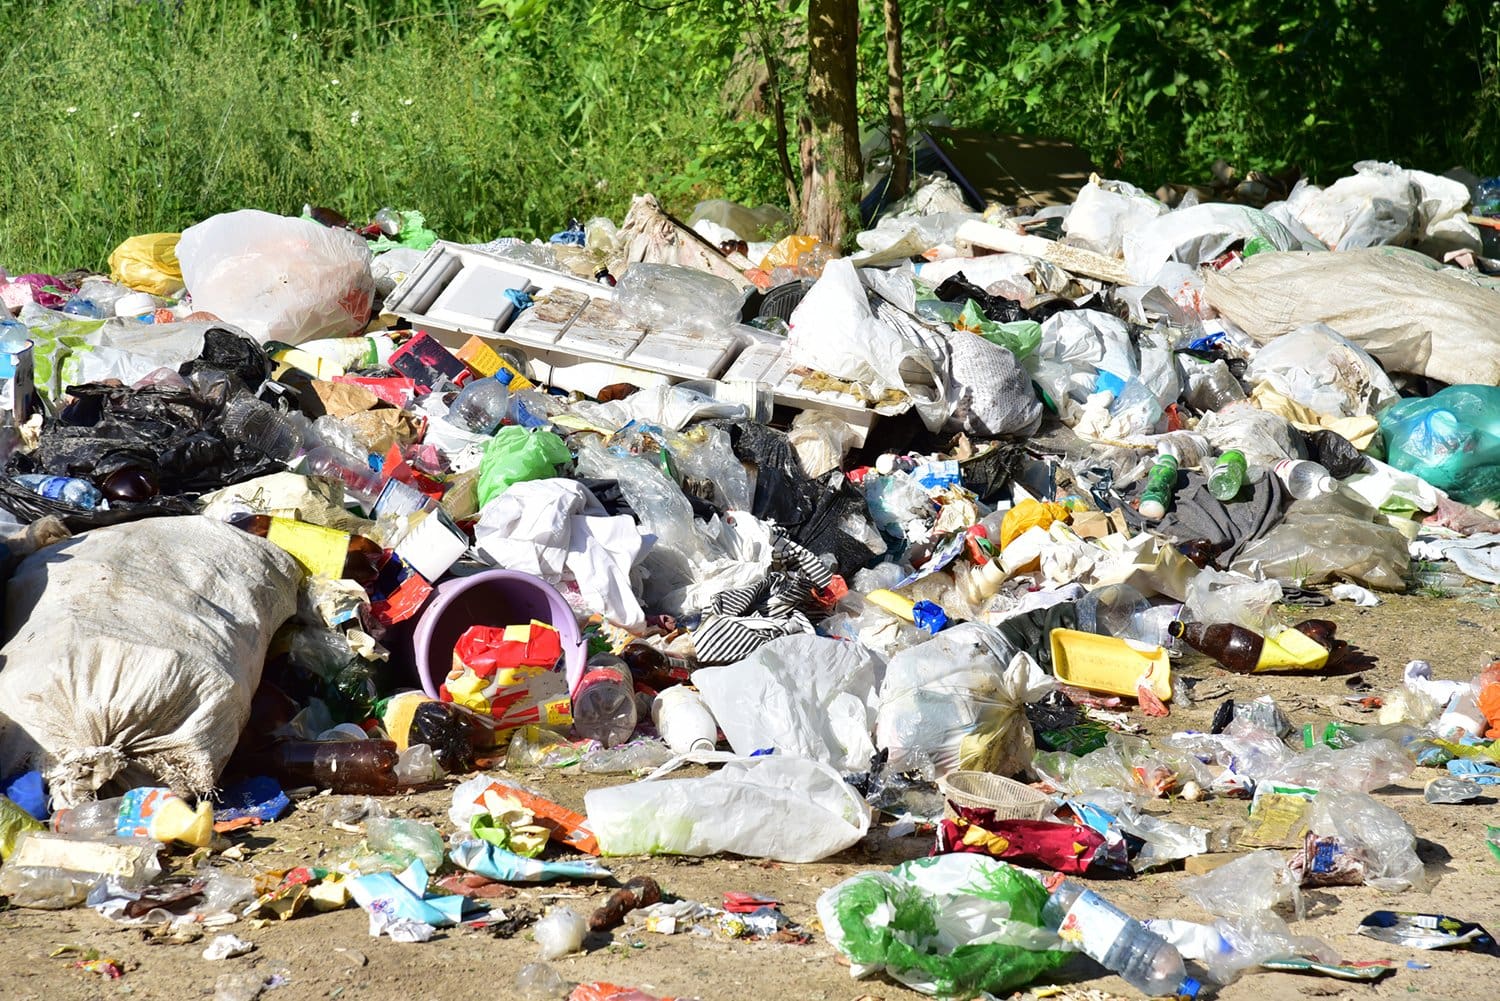 A large number of accumulated plastic bags and plastic packaging of household waste